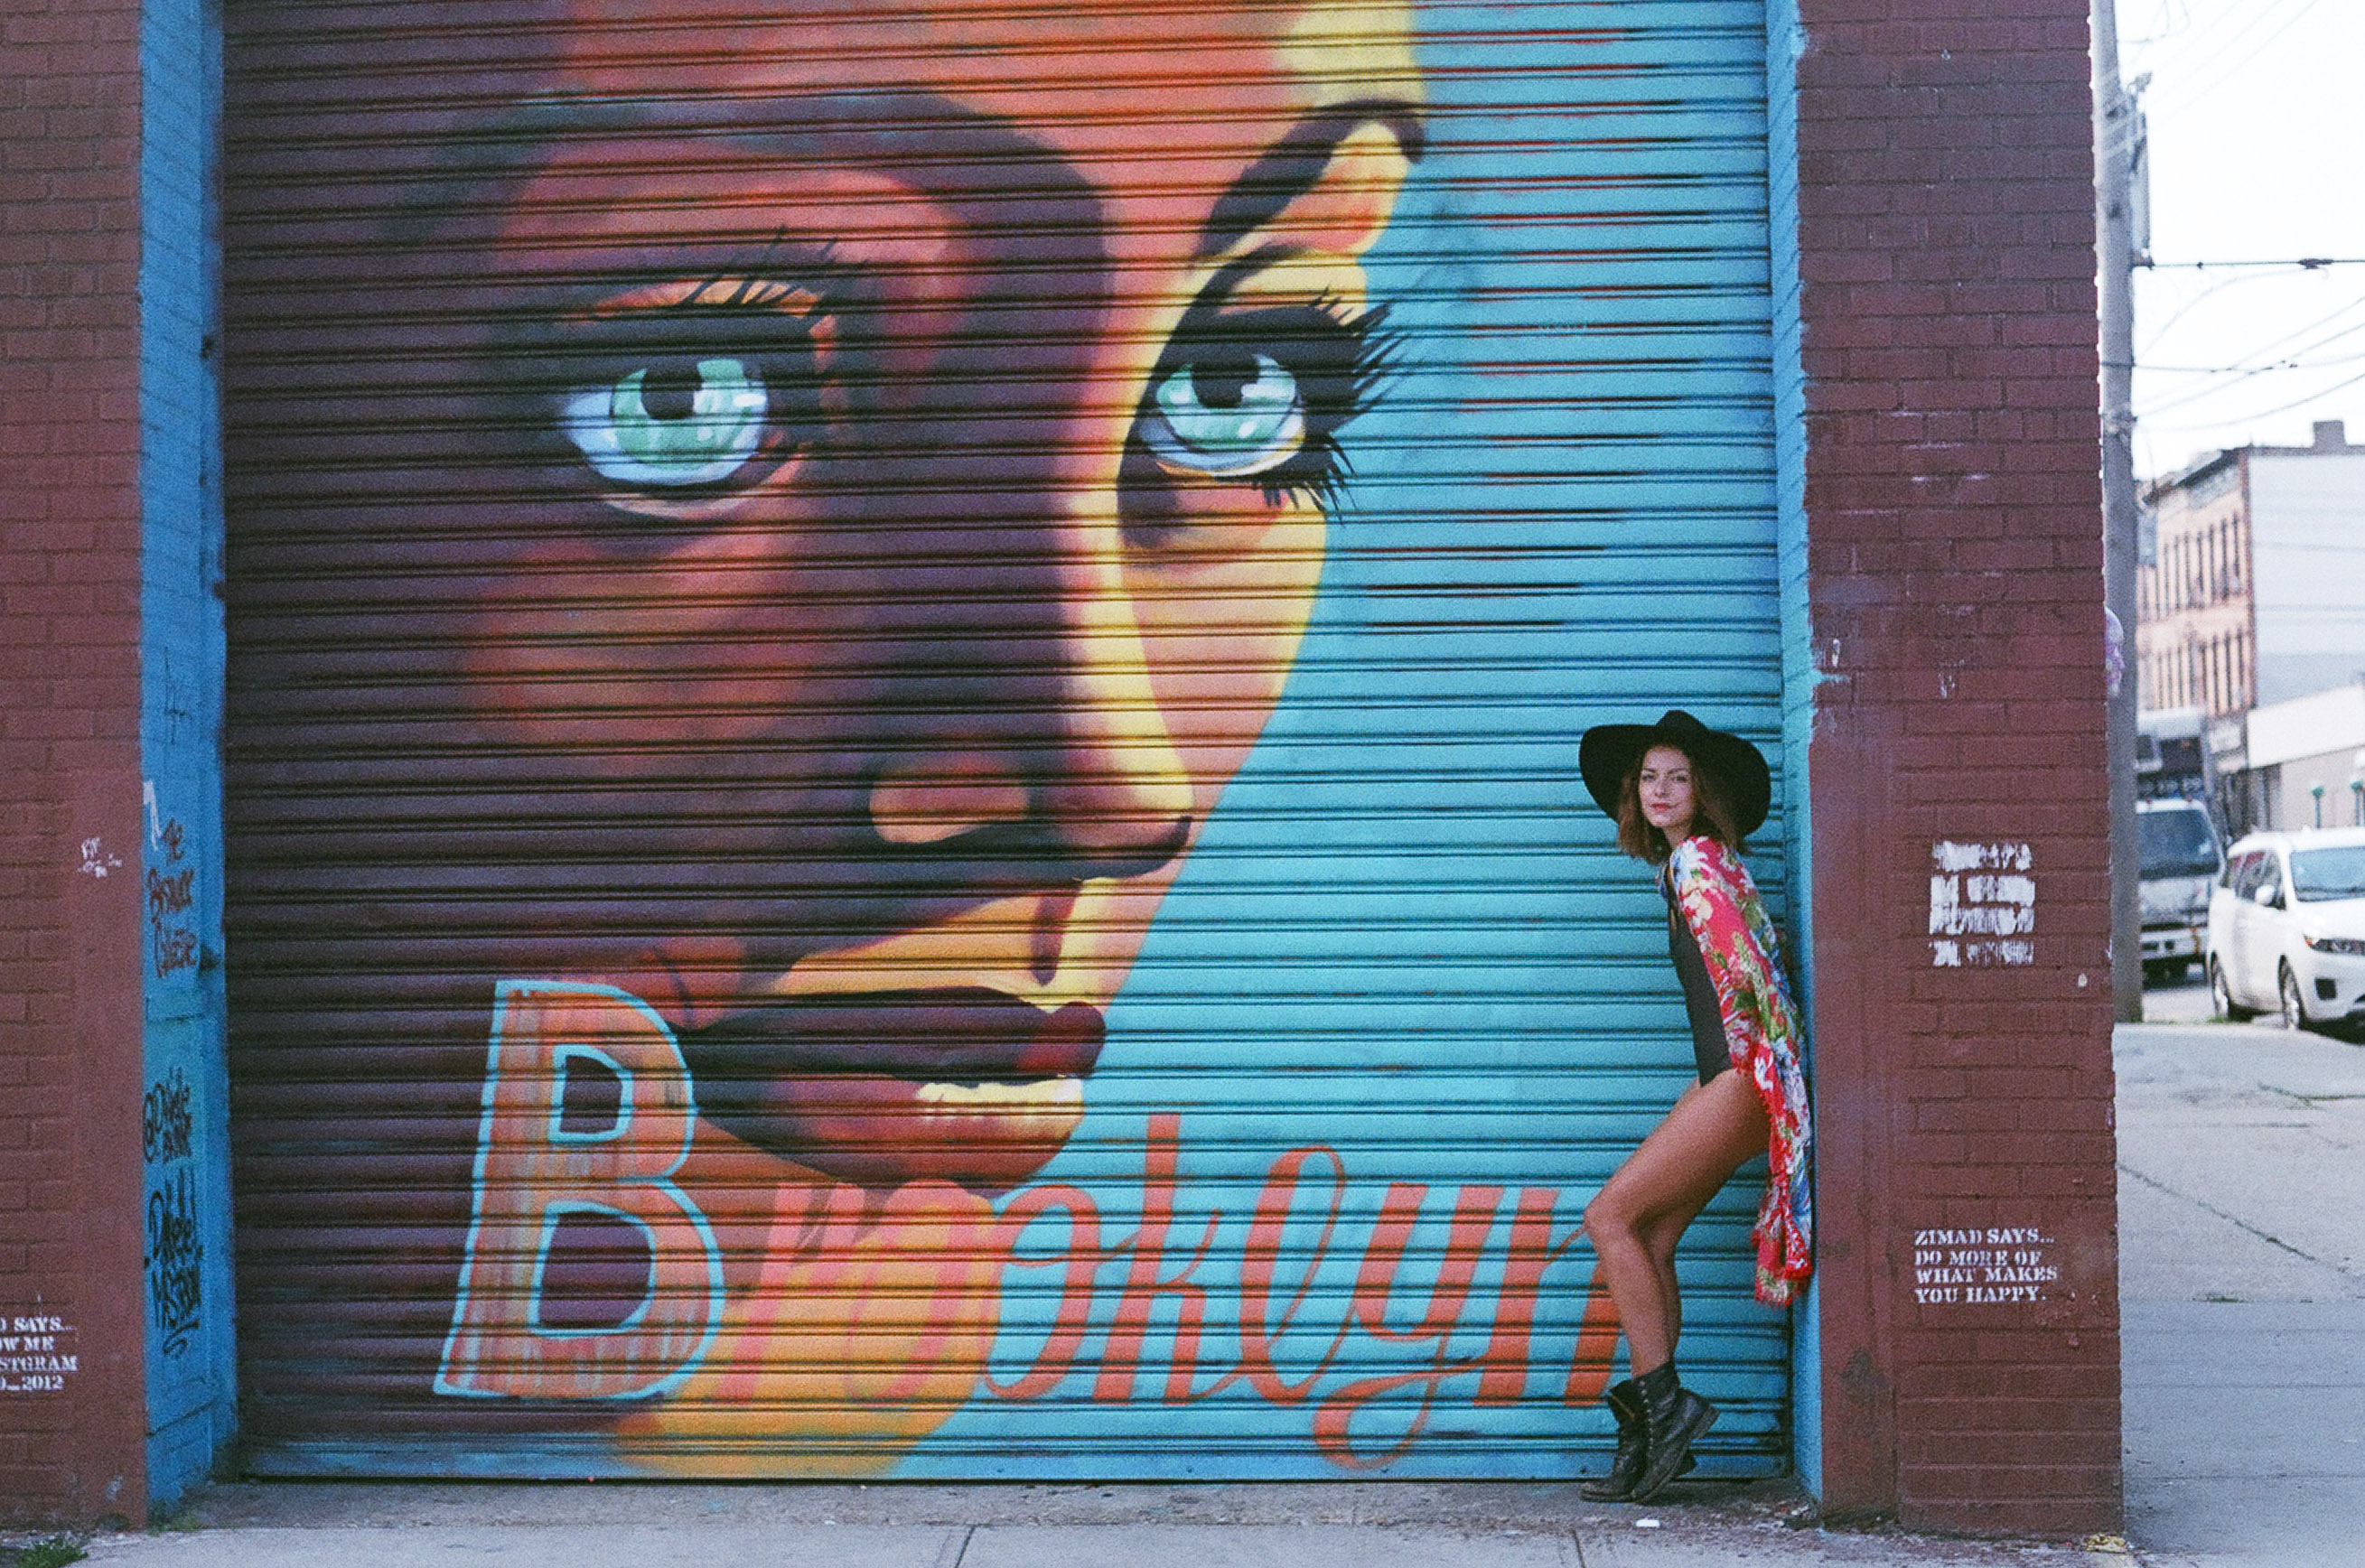 street art by Danielle Mastrion in bushwick photographed by cadencia photography.